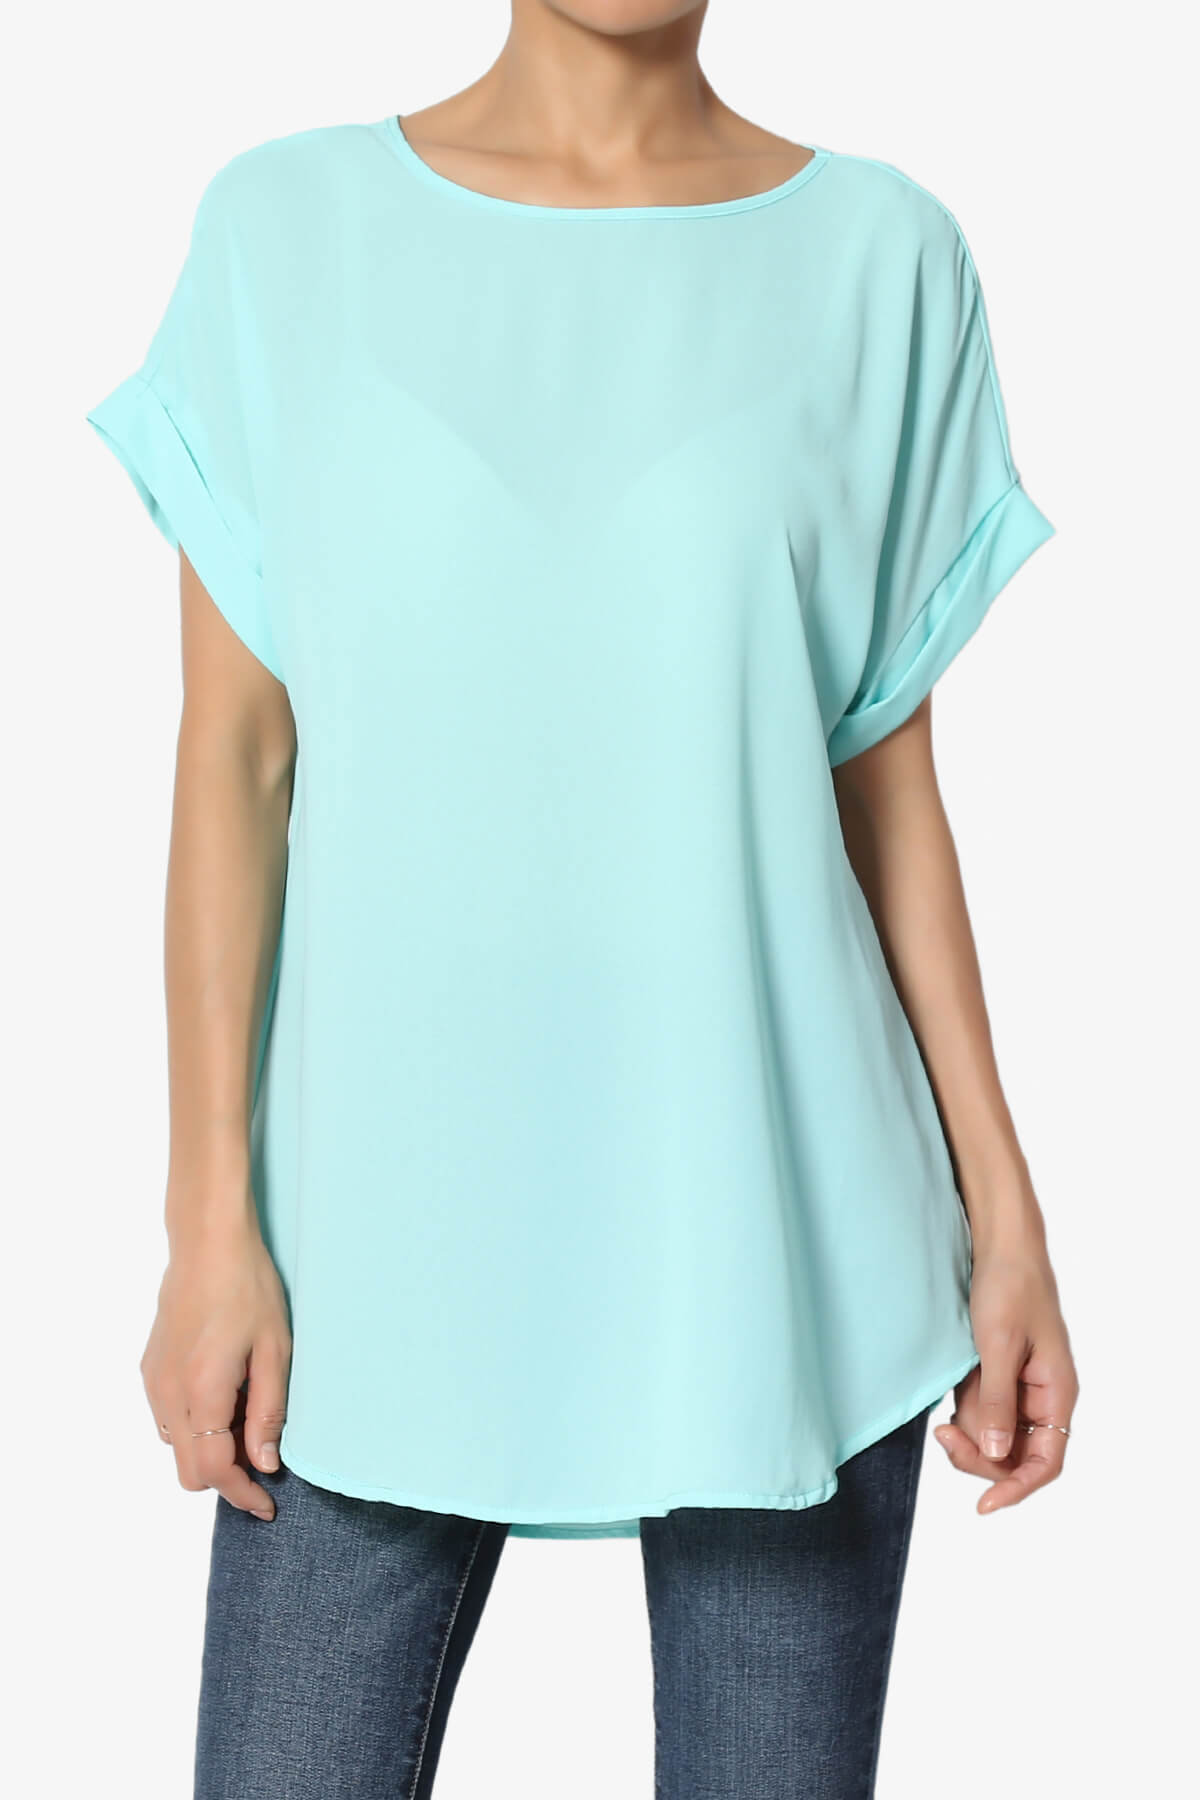 Load image into Gallery viewer, Juliette Boat Neck Chiffon Top BLUE MINT_1
